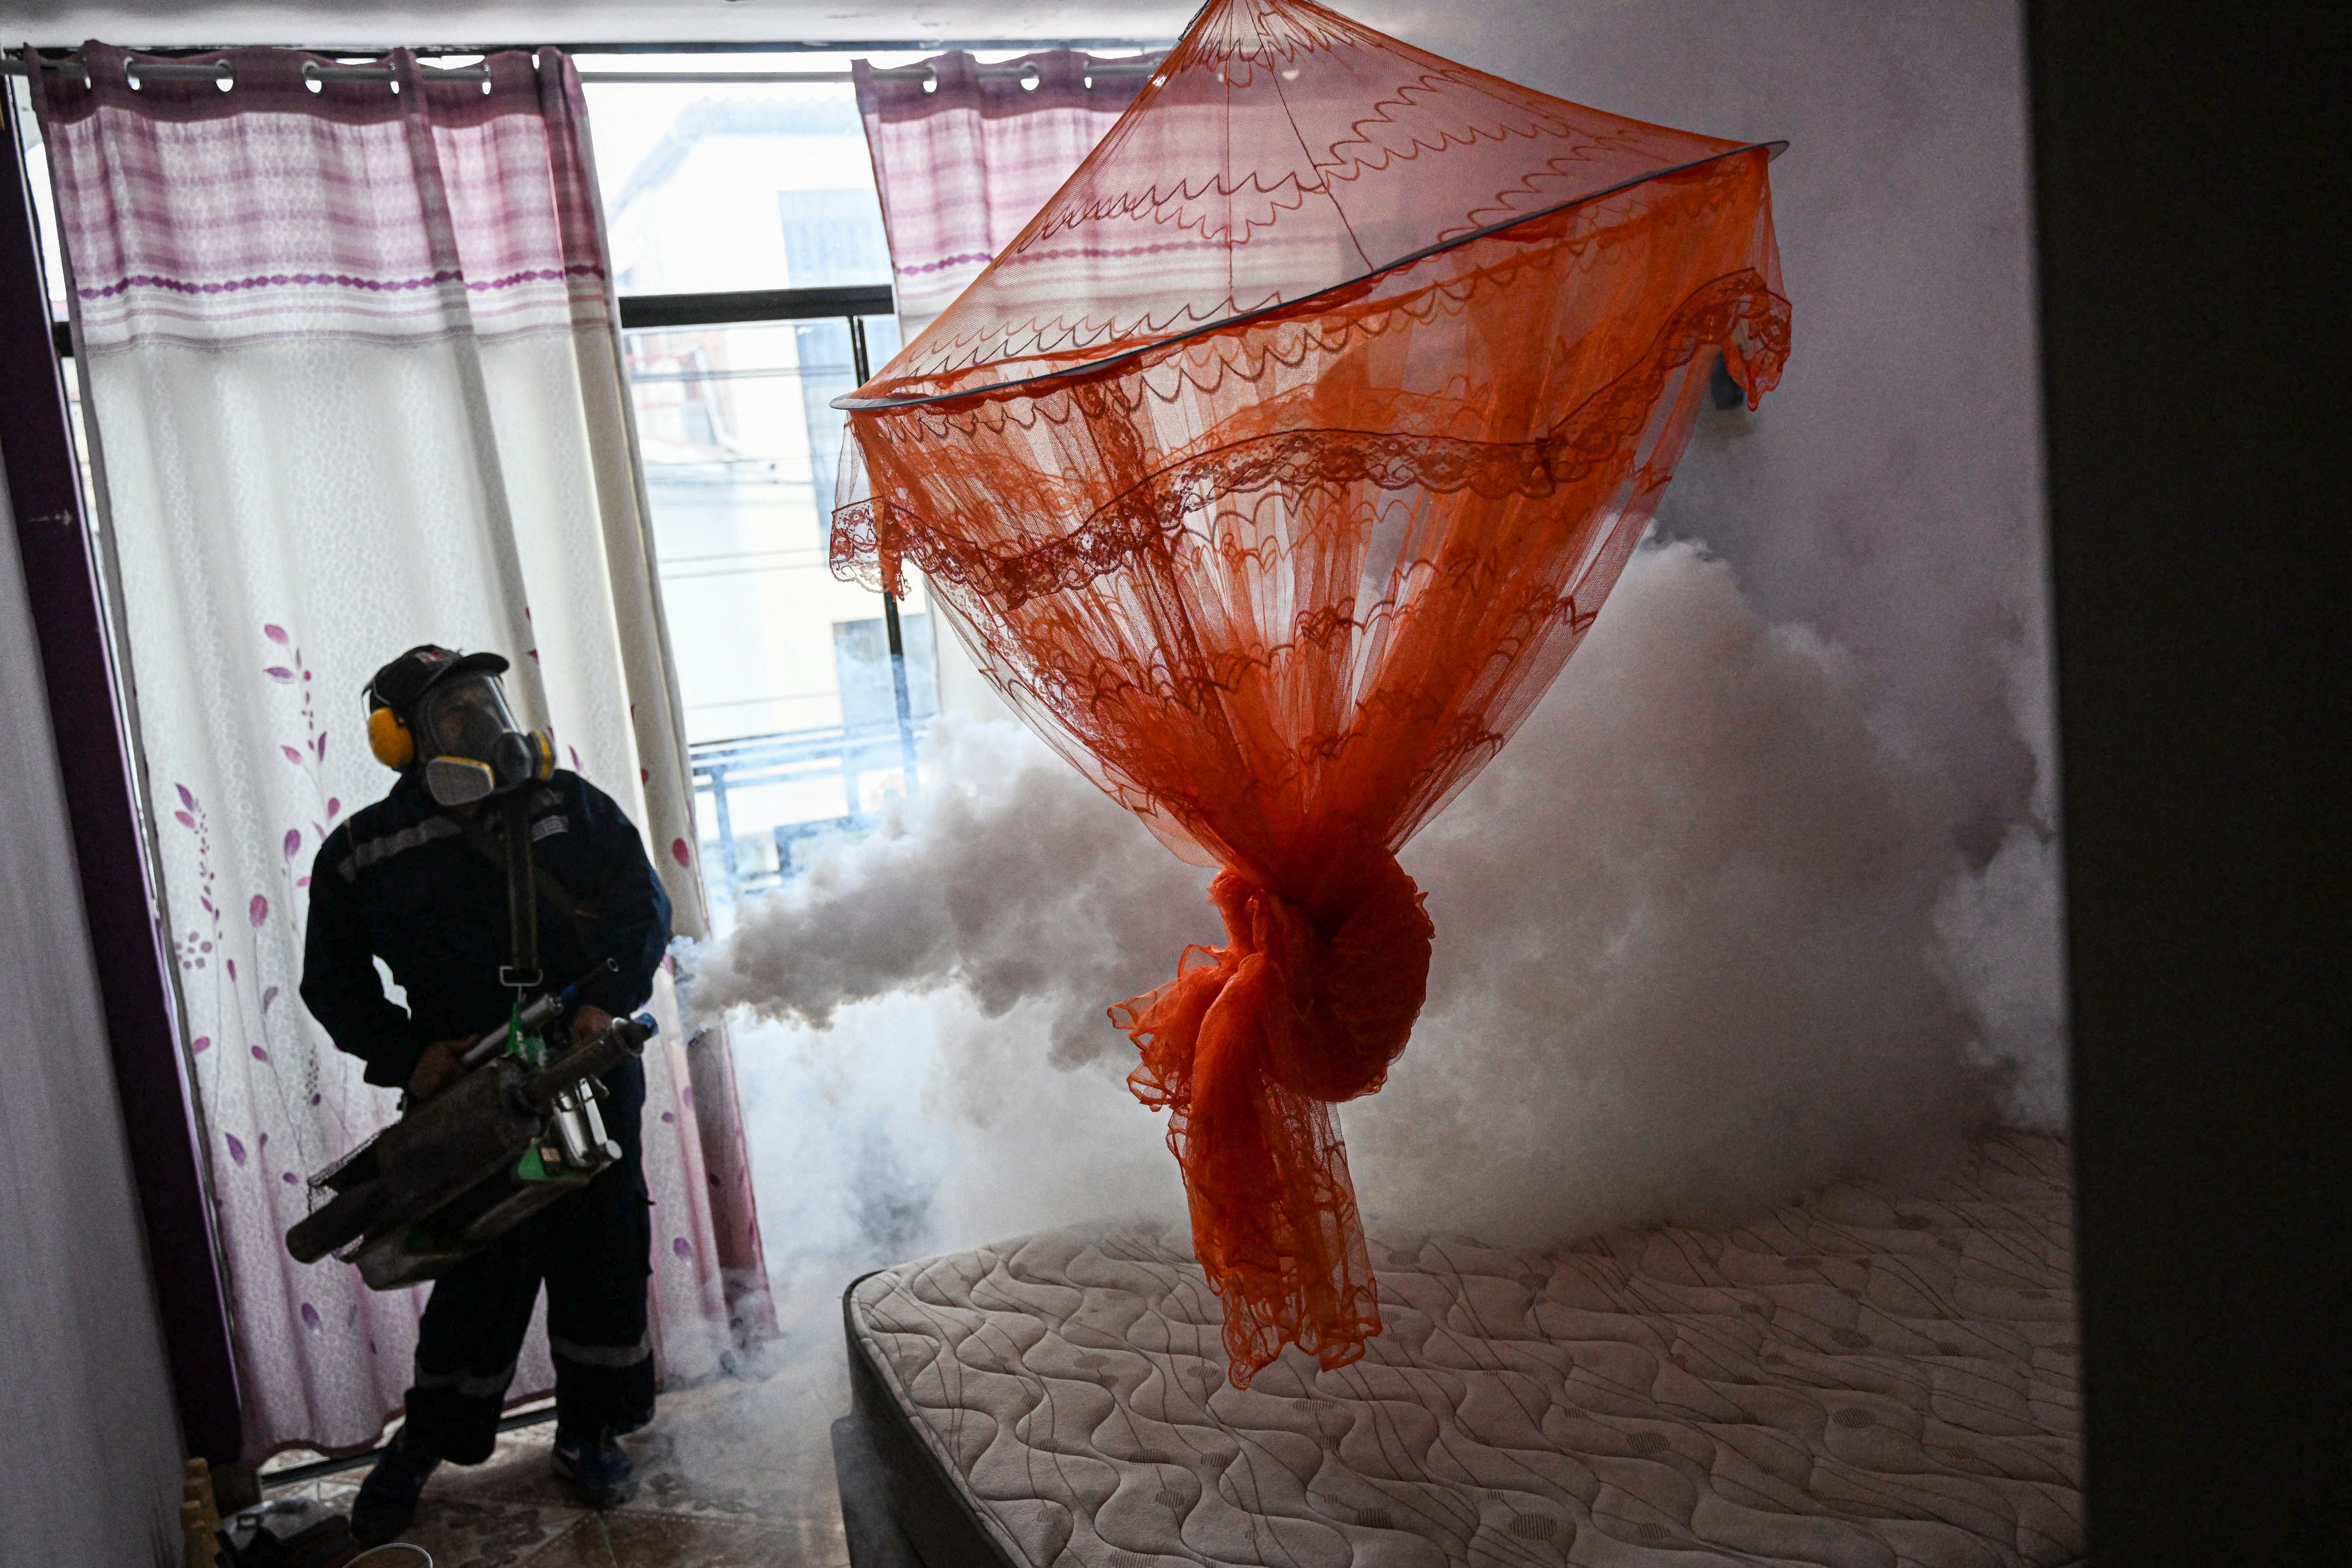 A Dengue Fever Outbreak Is Setting Records in the Americas